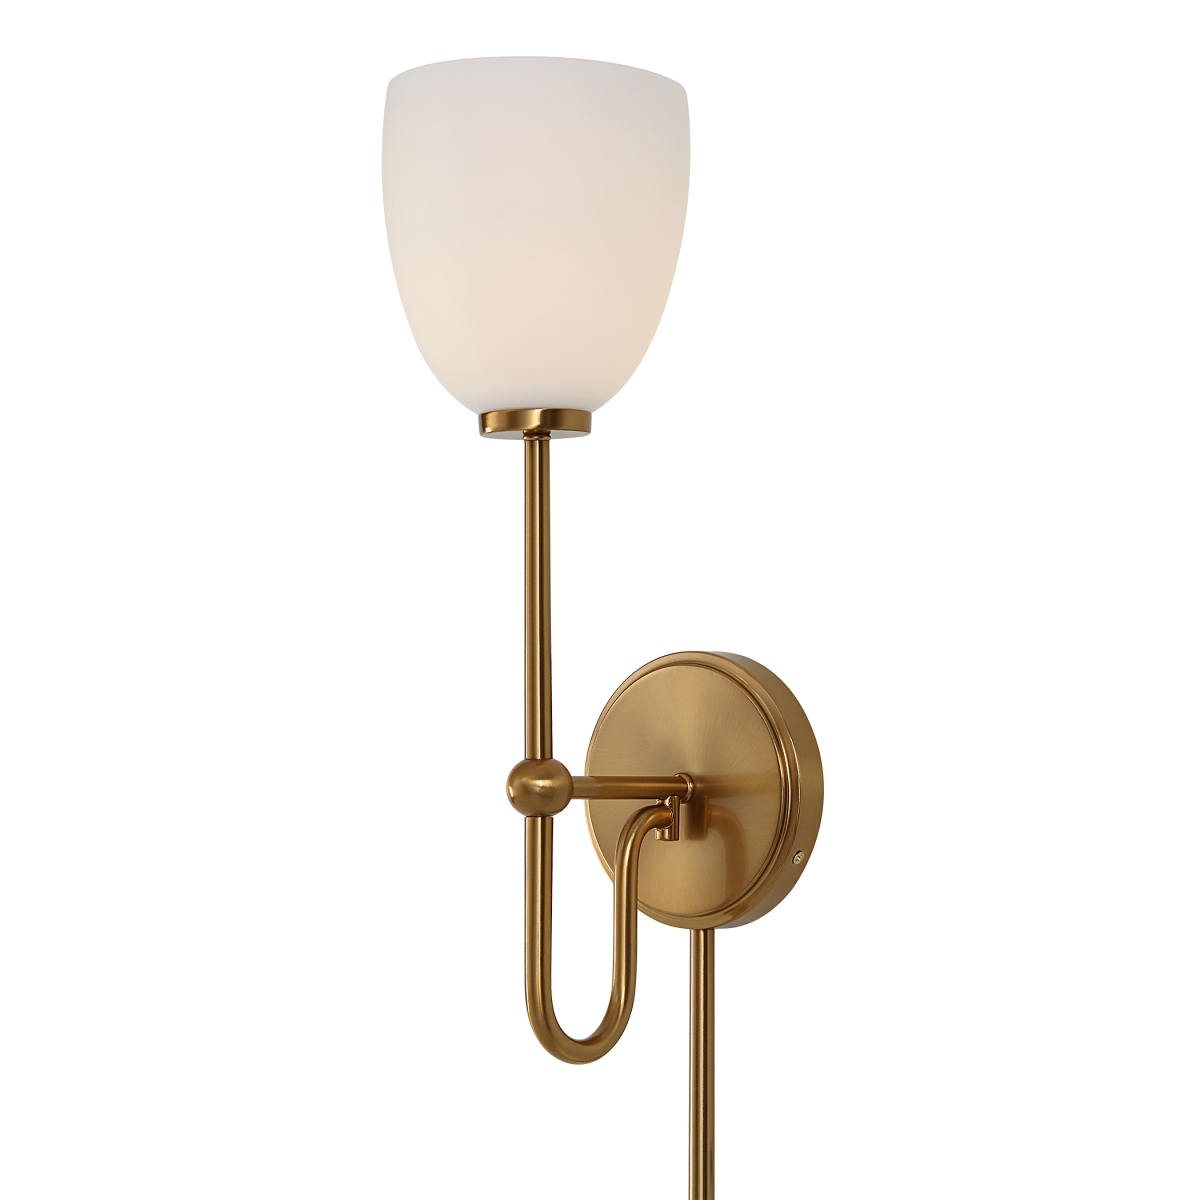 Picture of Uttermost 22580 18.25 x 5.75 x 8 in. Trophy 1 Light Brass Sconce